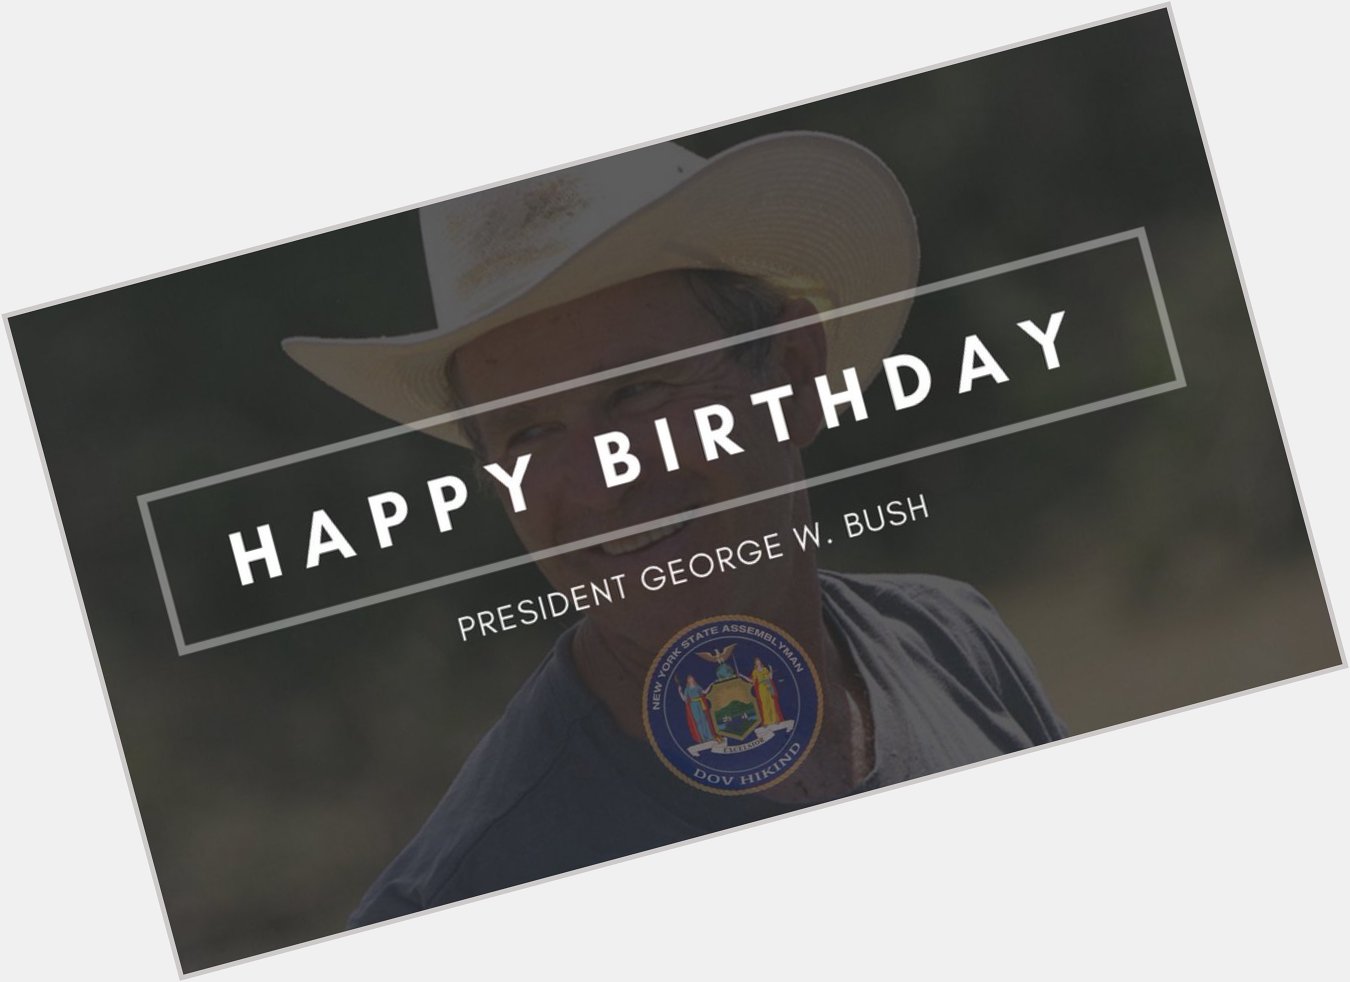 Happy Birthday to George W. Bush, 43rd President of the United States. 